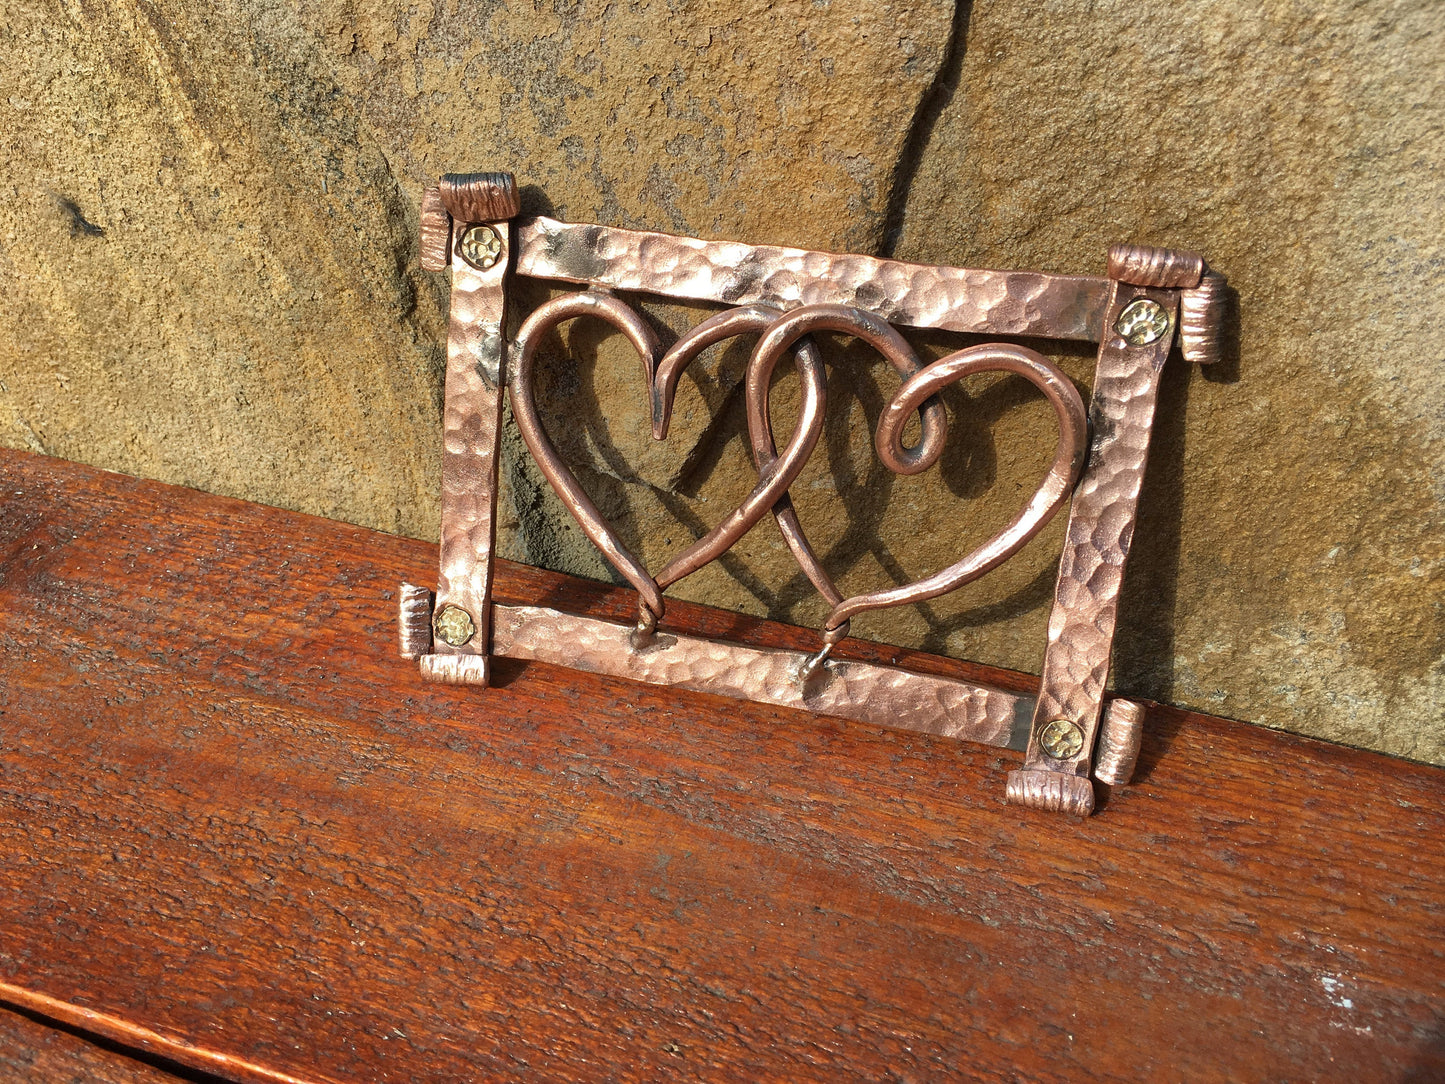 Copper hearts, copper frame, copper gift, gift box, copper gift for her,copper anniversary,7 year anniversary, copper decor, 7th anniversary